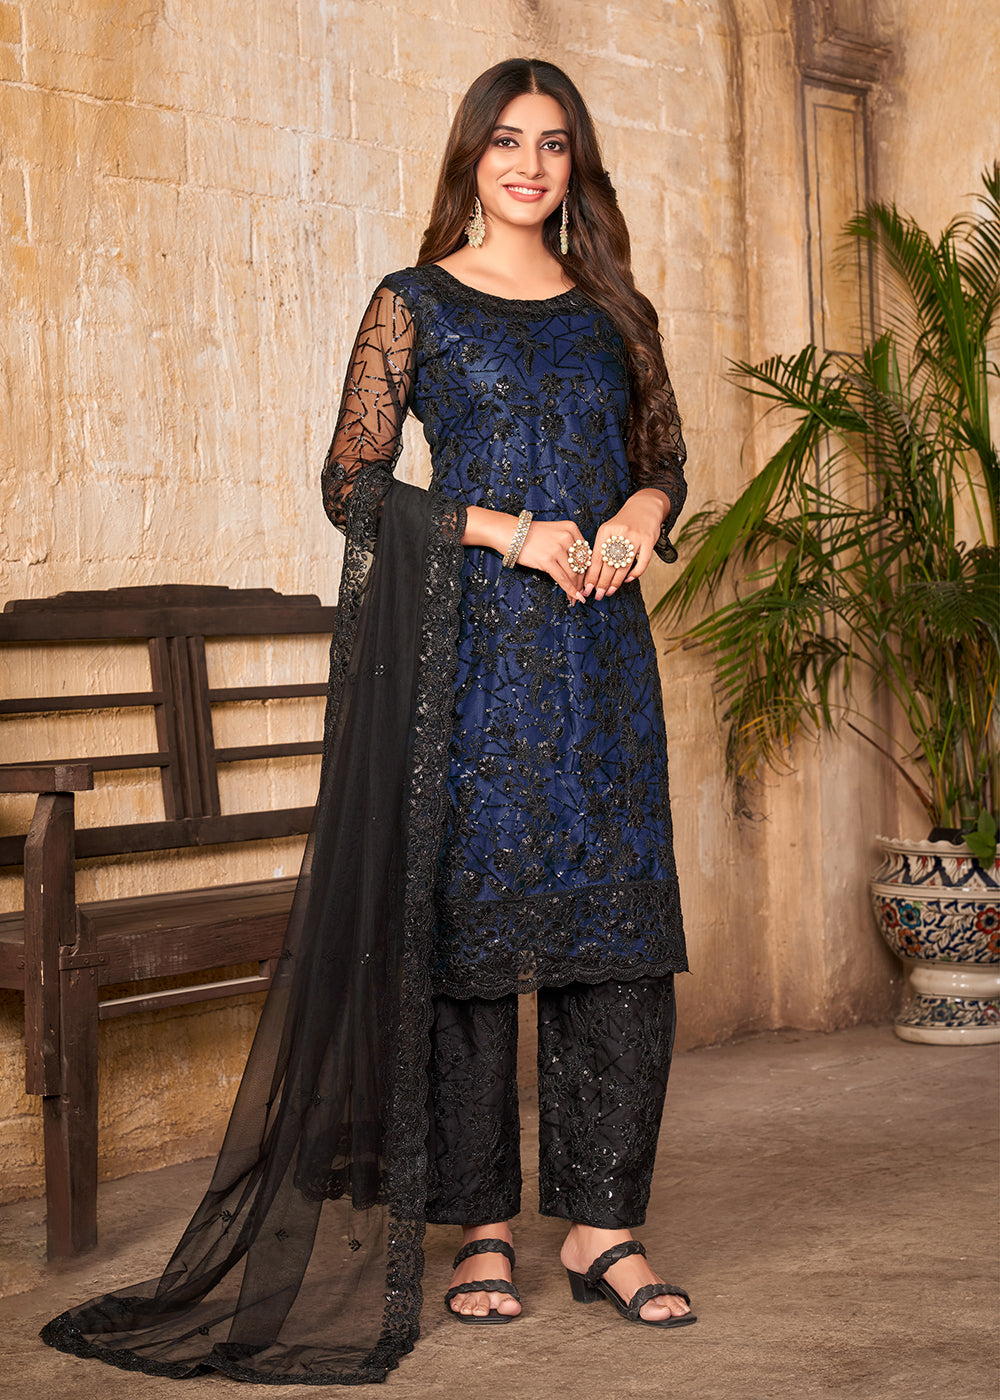 Buy Now Party Wear Blue Embroidered Net Pant Style Salwar Suit Online in USA, UK, Canada & Worldwide at Empress Clothing.